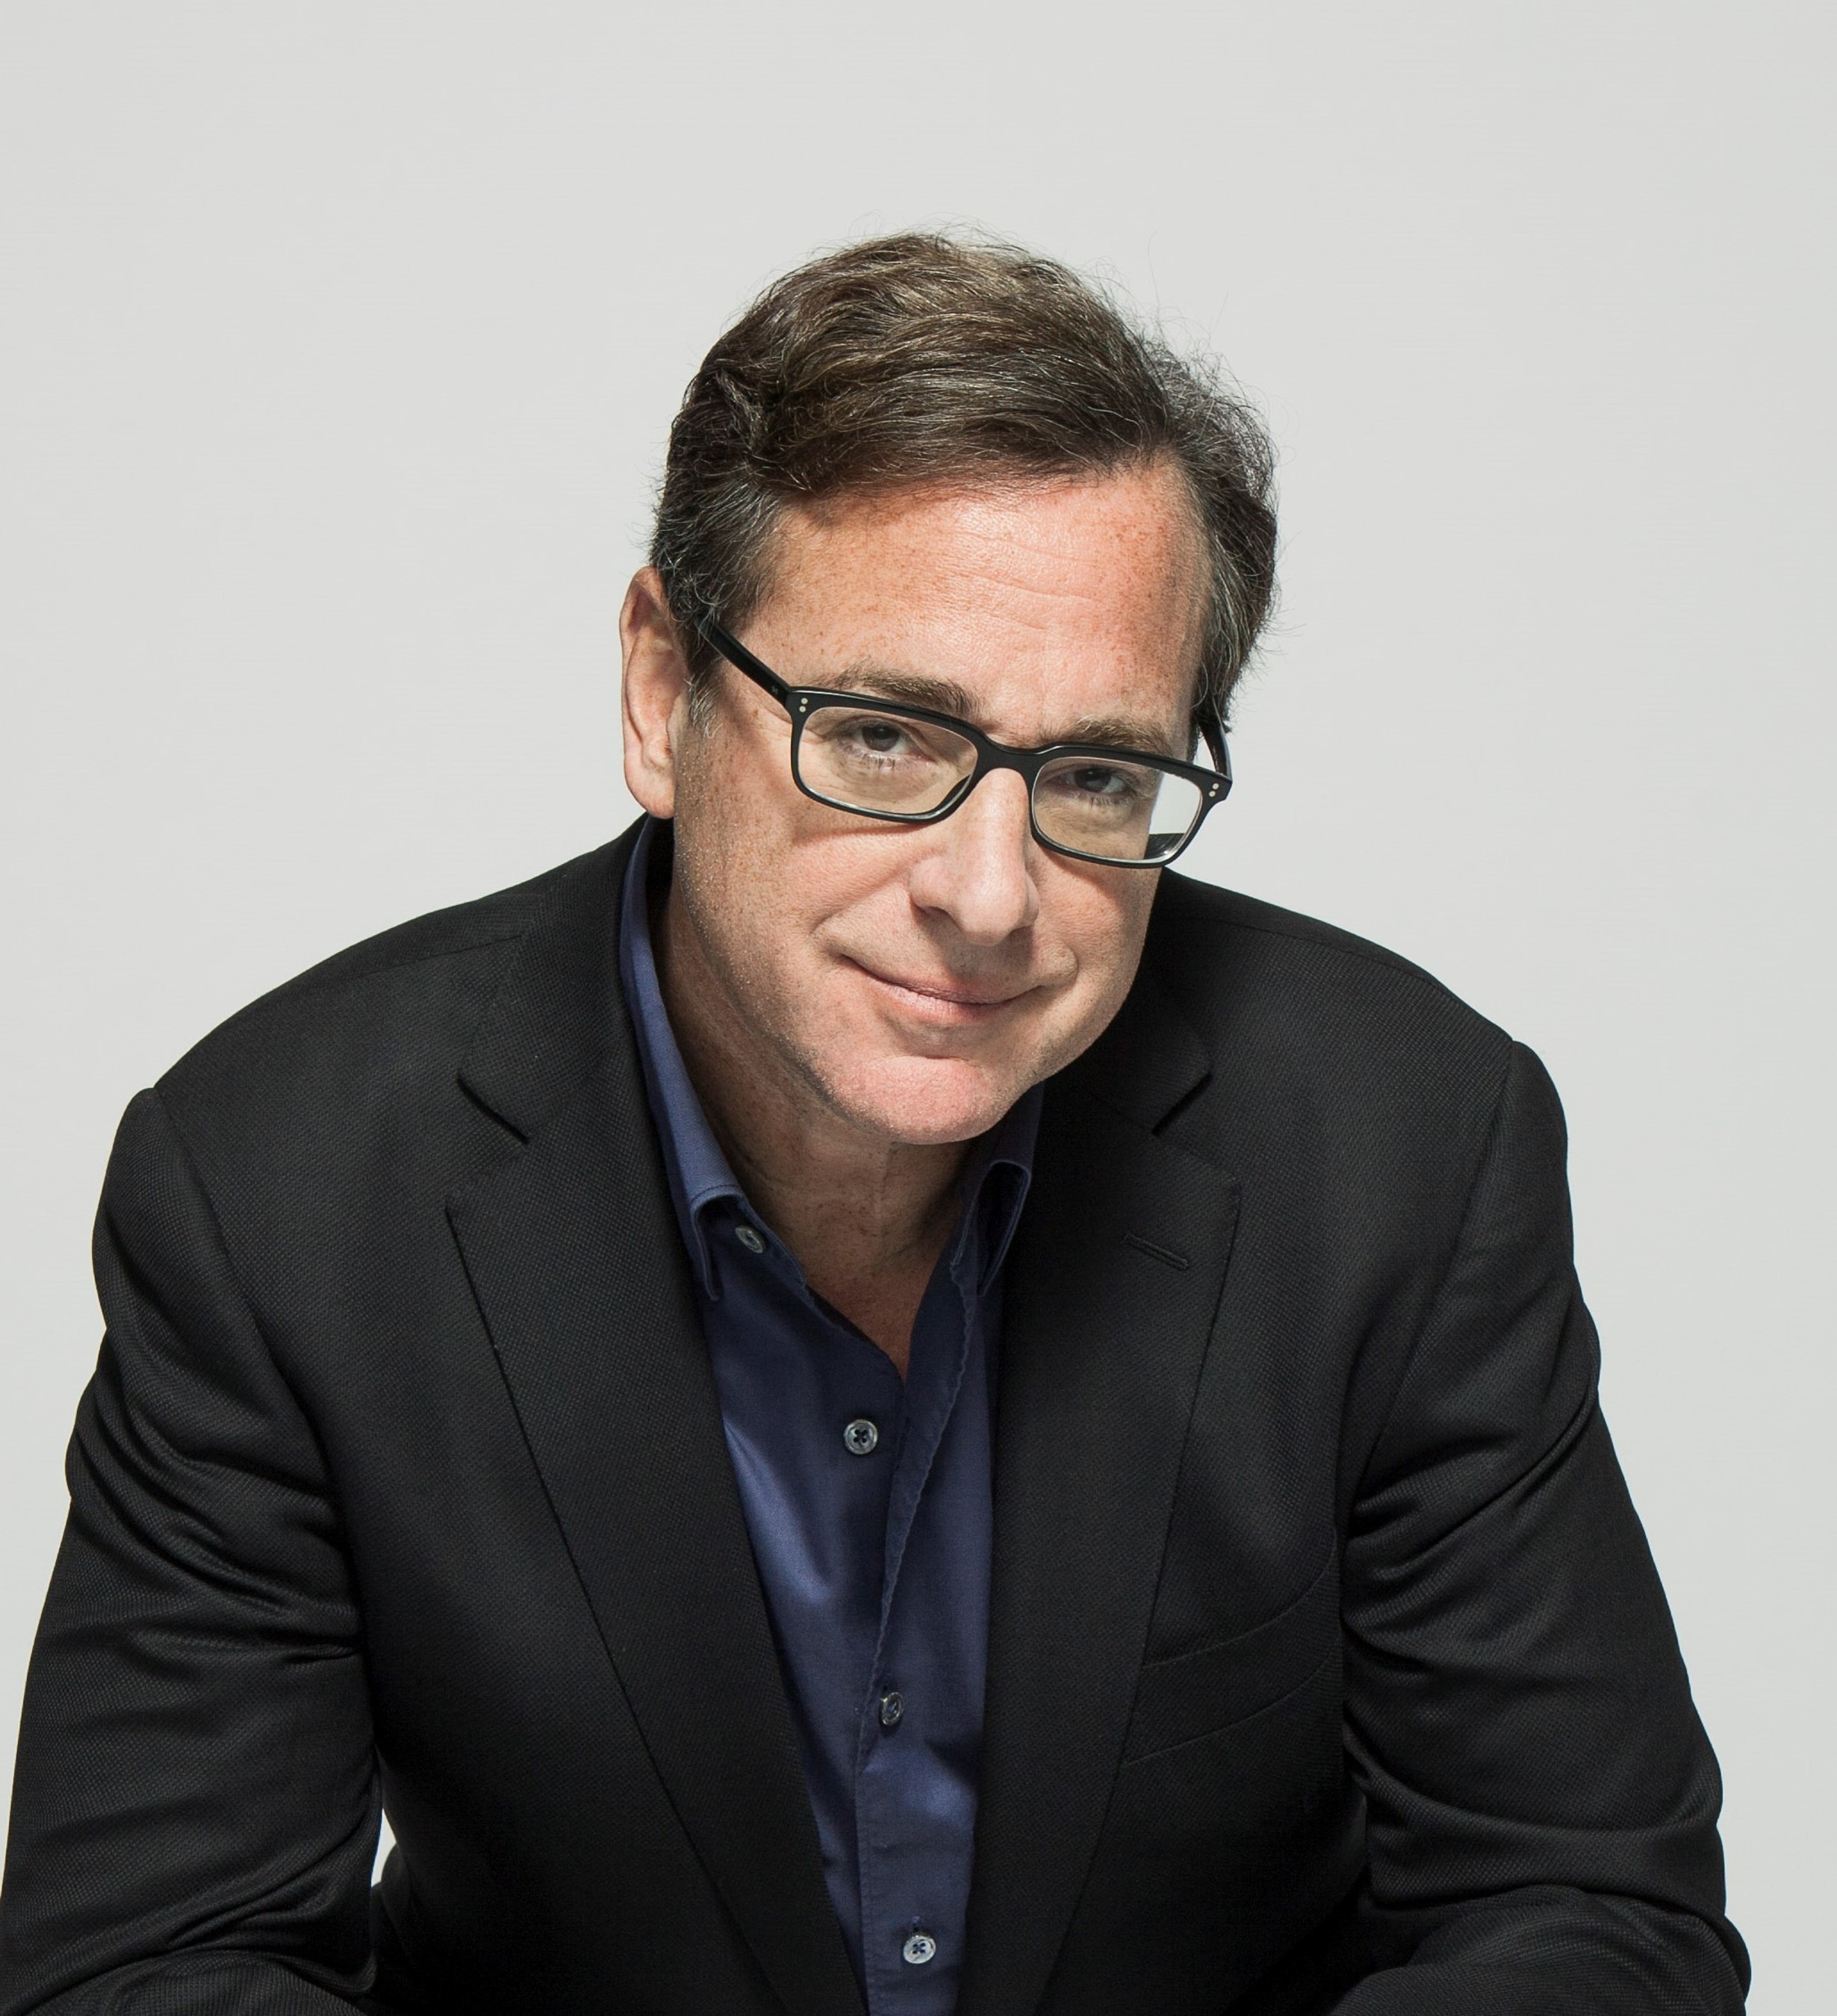 Comedian Bob Saget will host the 31st Cool Comedy - Hot Cuisine, a benefit for the Scleroderma Research Foundation on April 23, 2014 in San Francisco. (PRNewsFoto/Scleroderma Research Foundation)